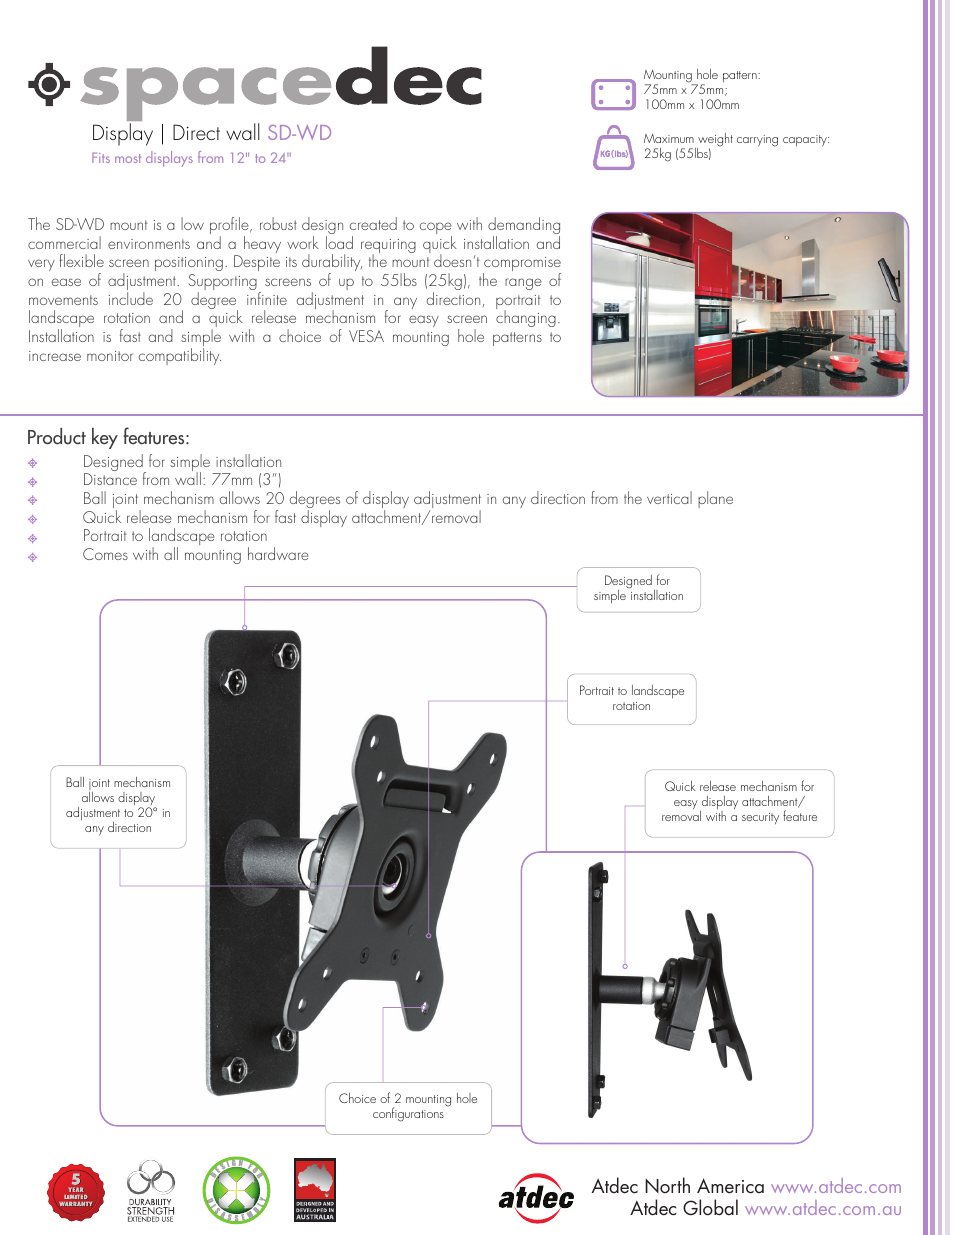 Spacedec SD-WD product brochure